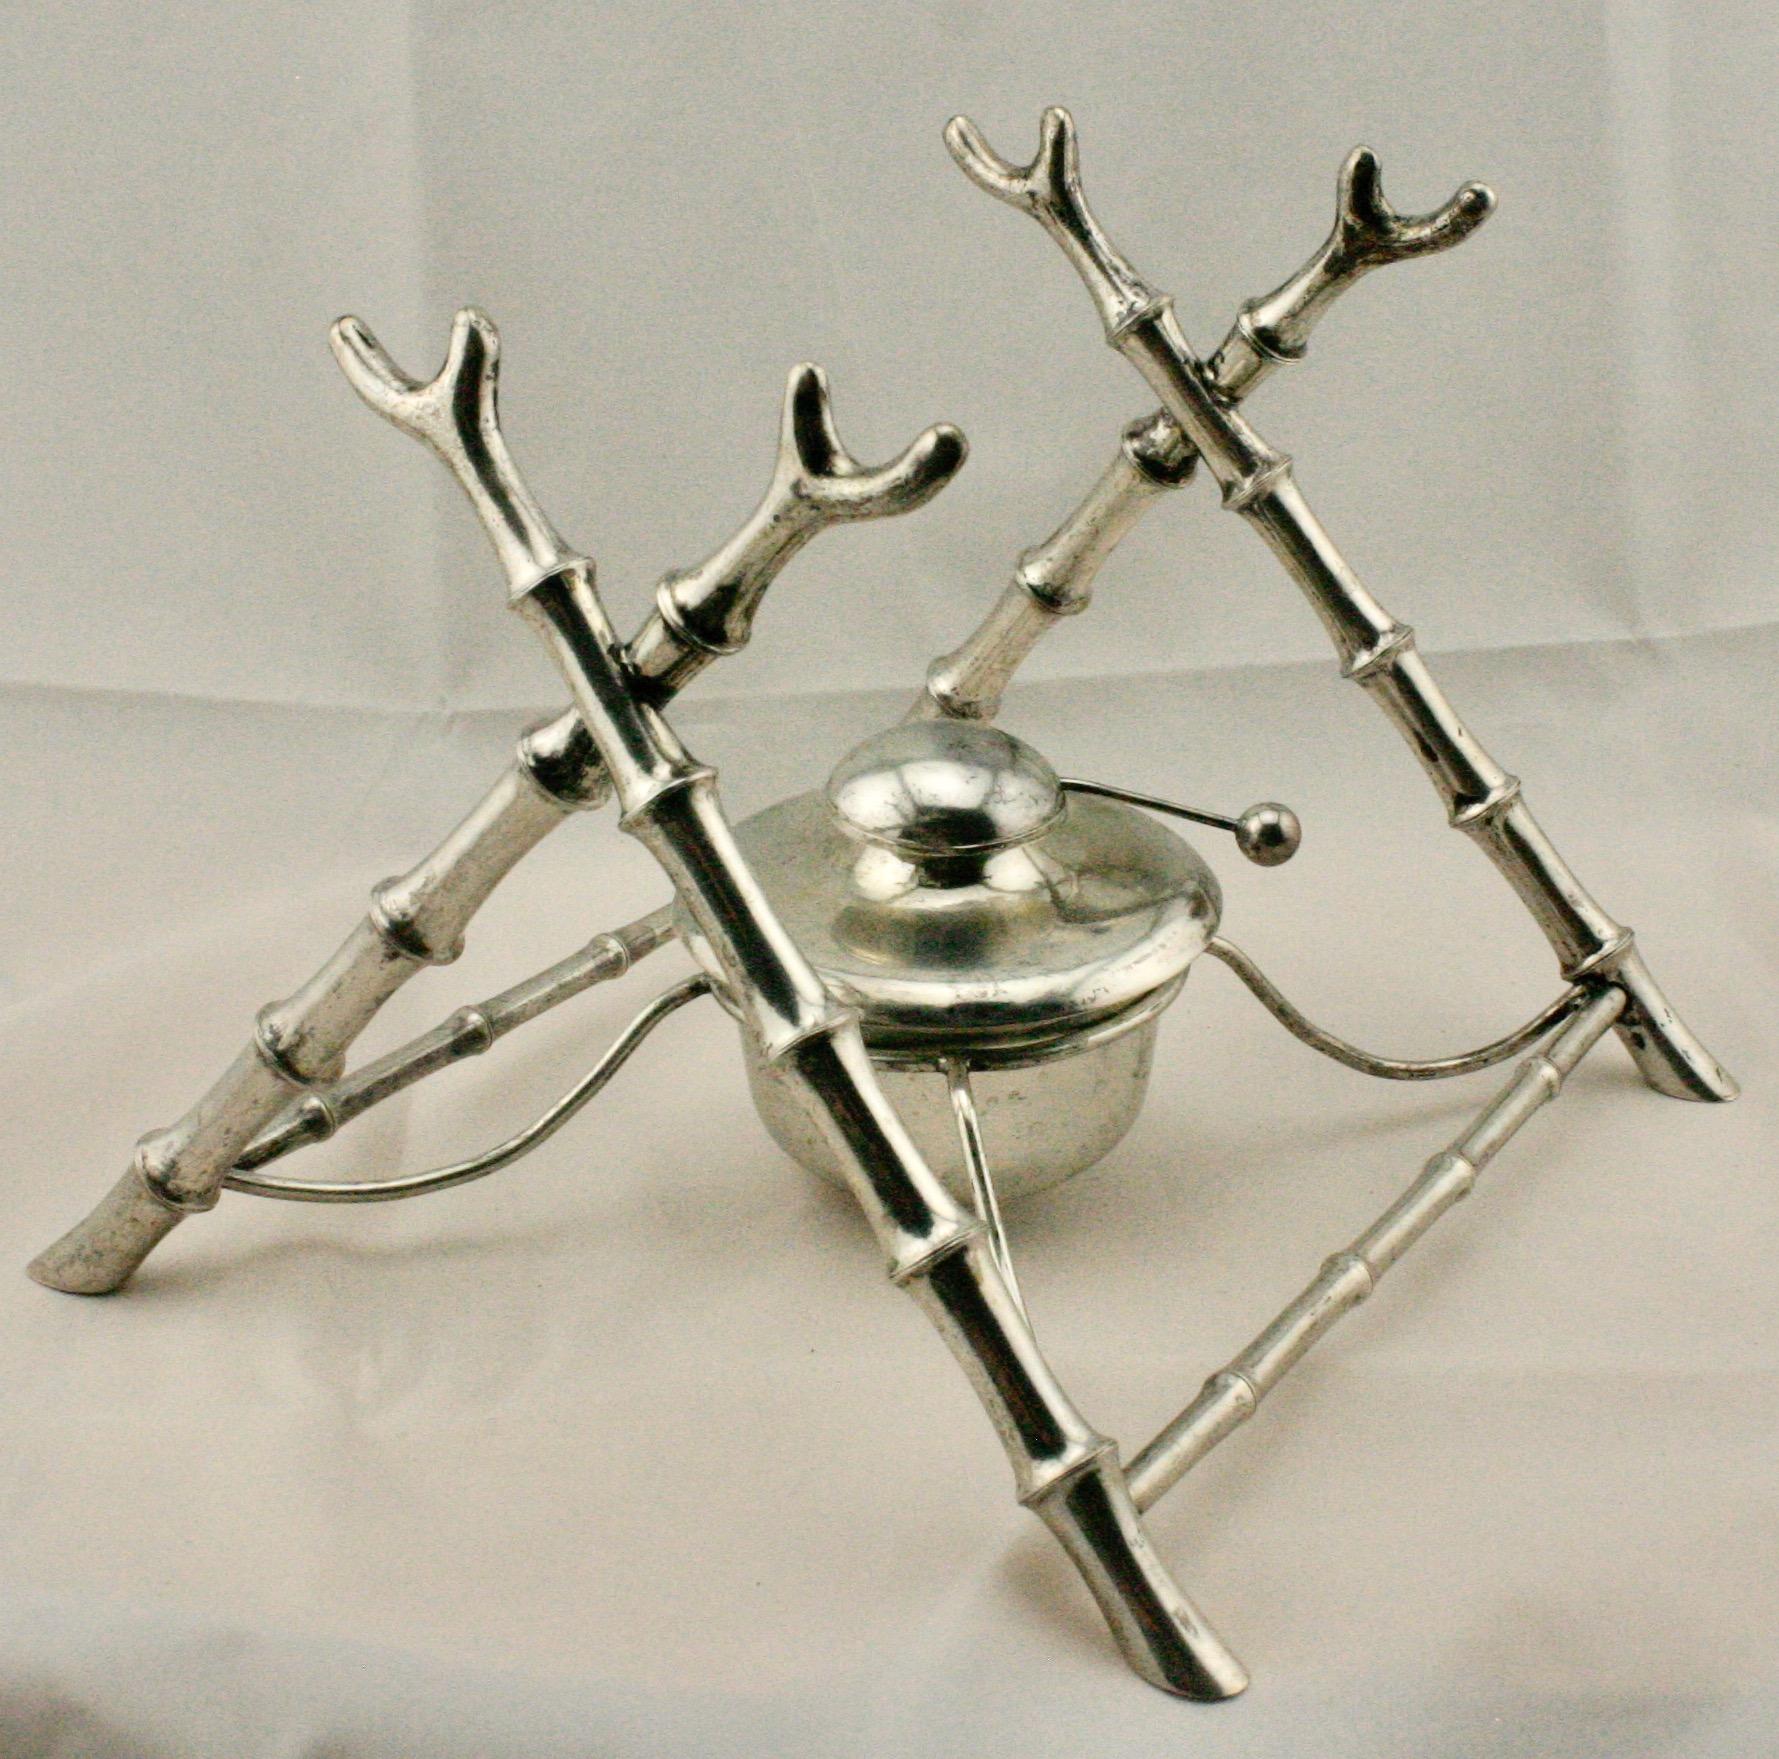 Chinese Export Silver Teapot or Kettle on a Stand by Leeching, circa 1900 For Sale 1